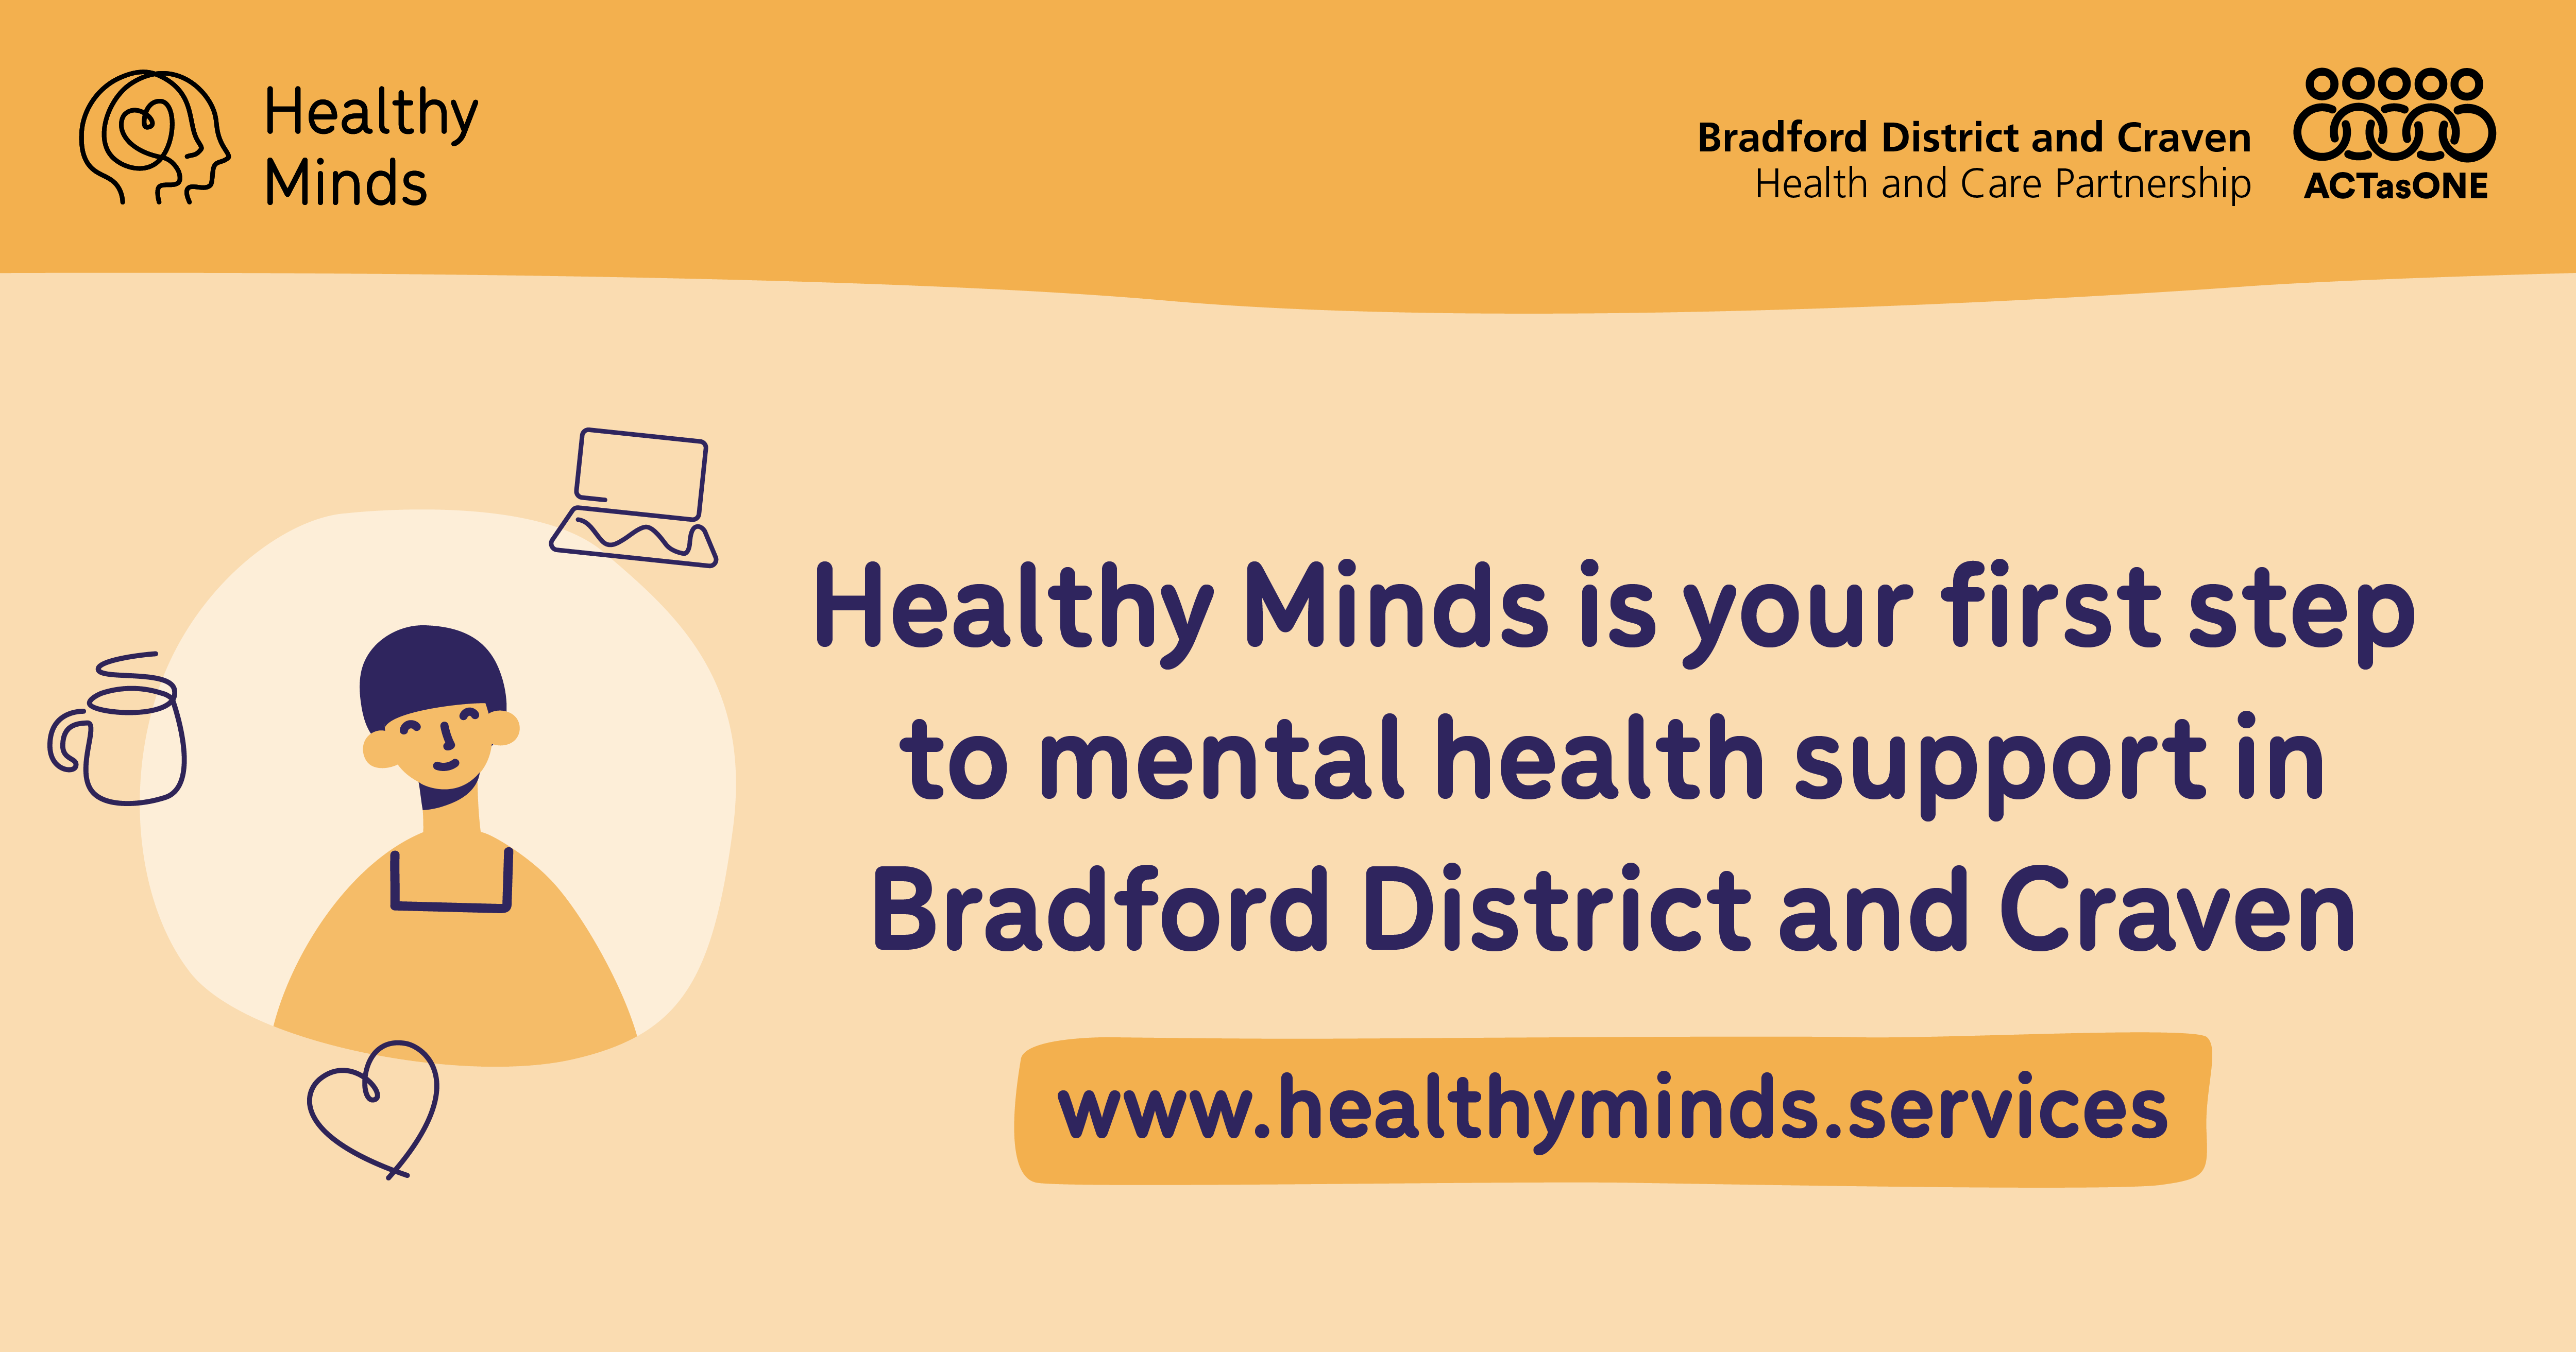 Healthy Minds is your first step to mental health support in Bradford District and Craven